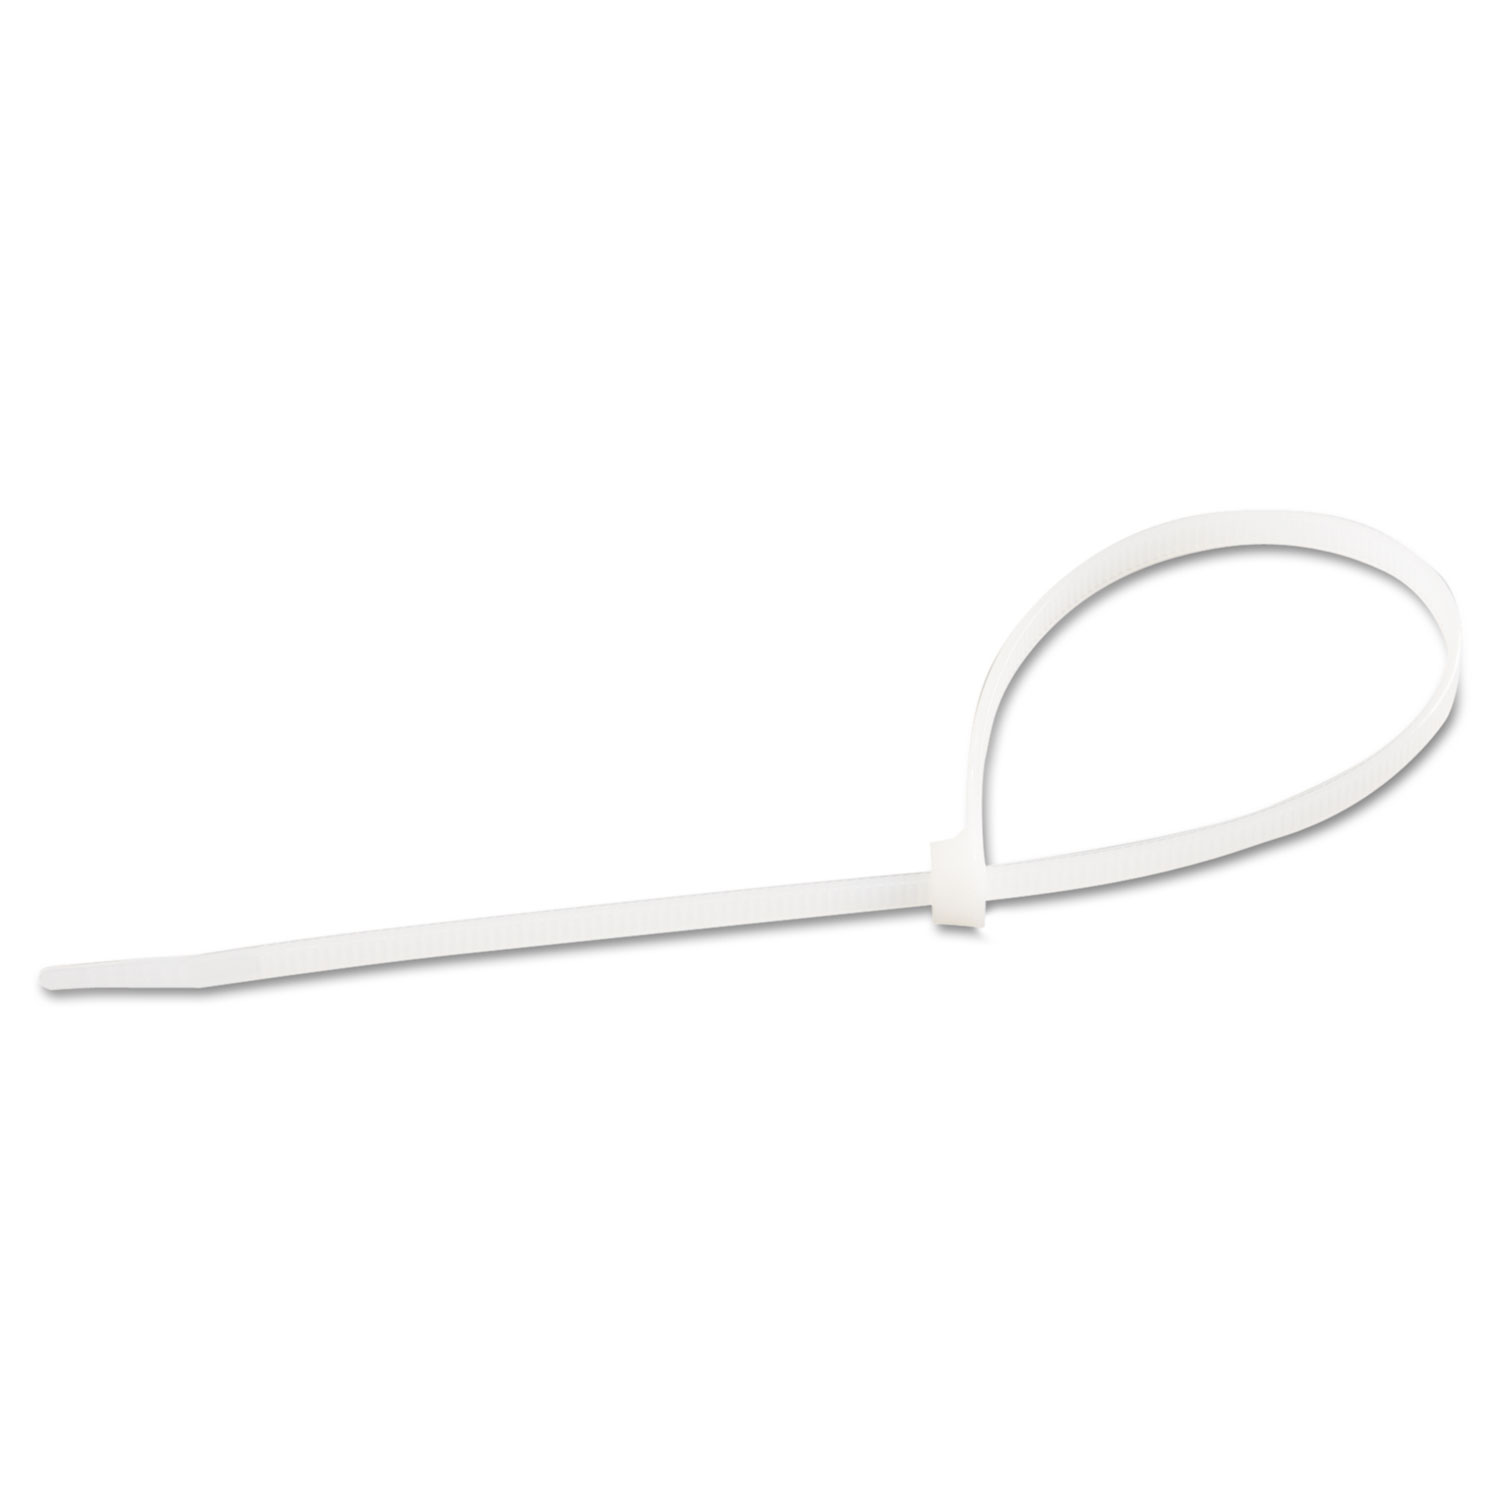  GB 46-310 Cable Ties, 11, 75 lb, White, 100/Pack (GDB46310) 